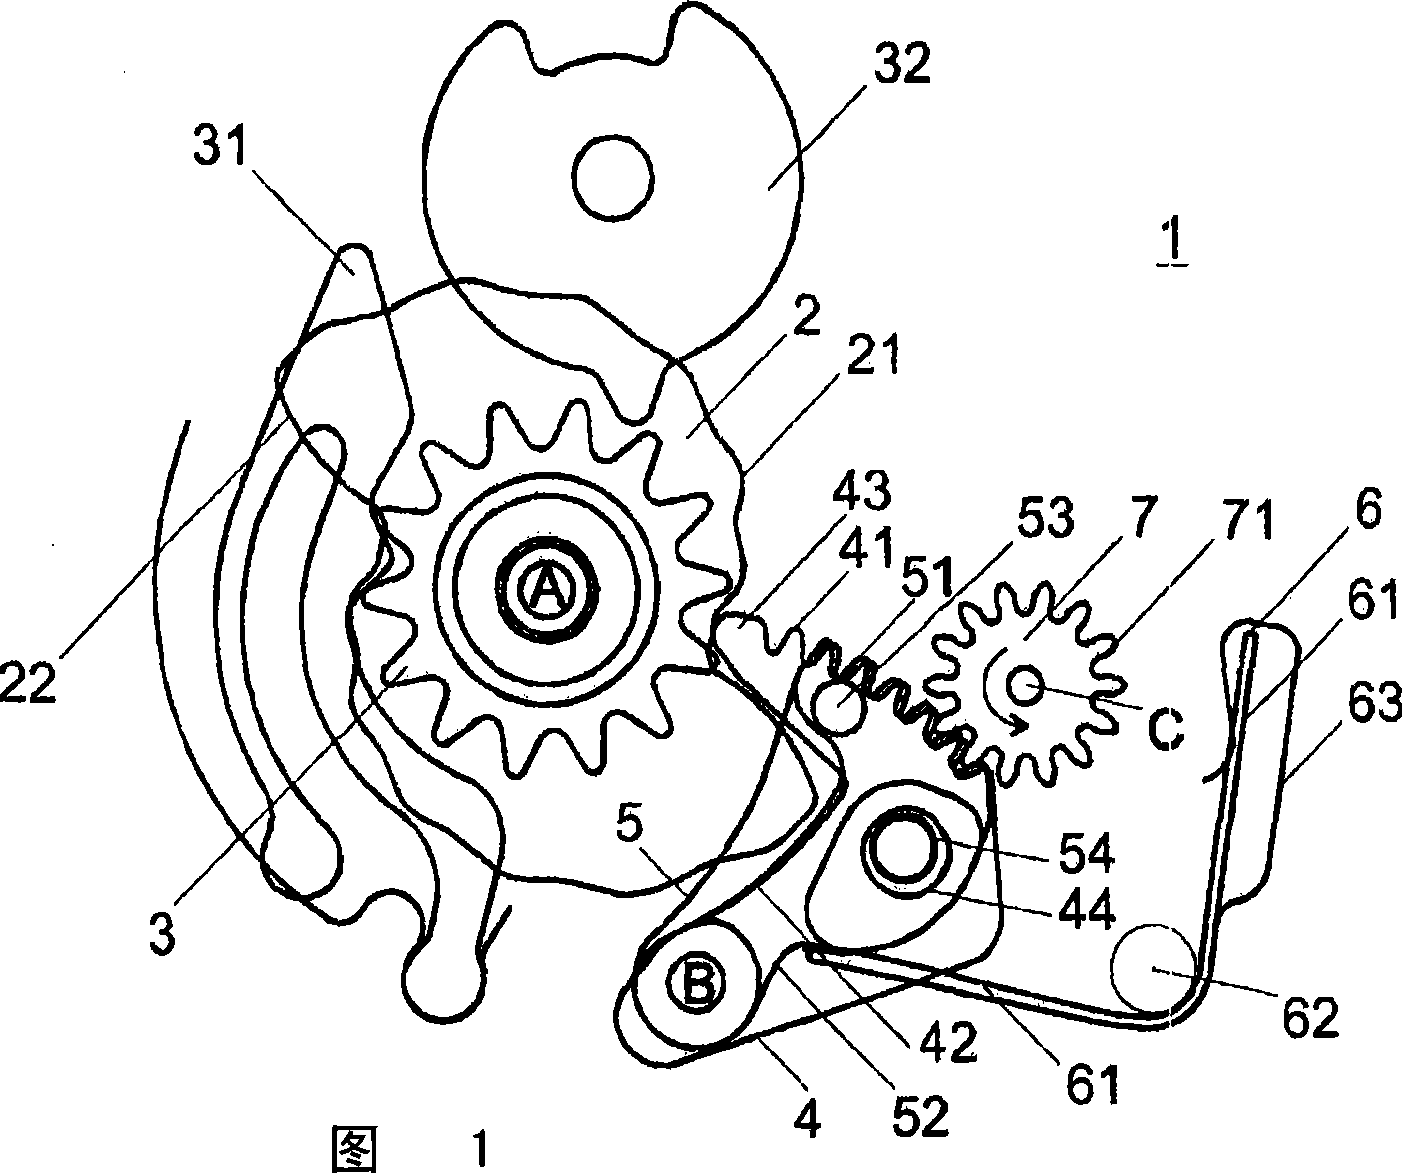 Mechanism for moving an indicator of a clock